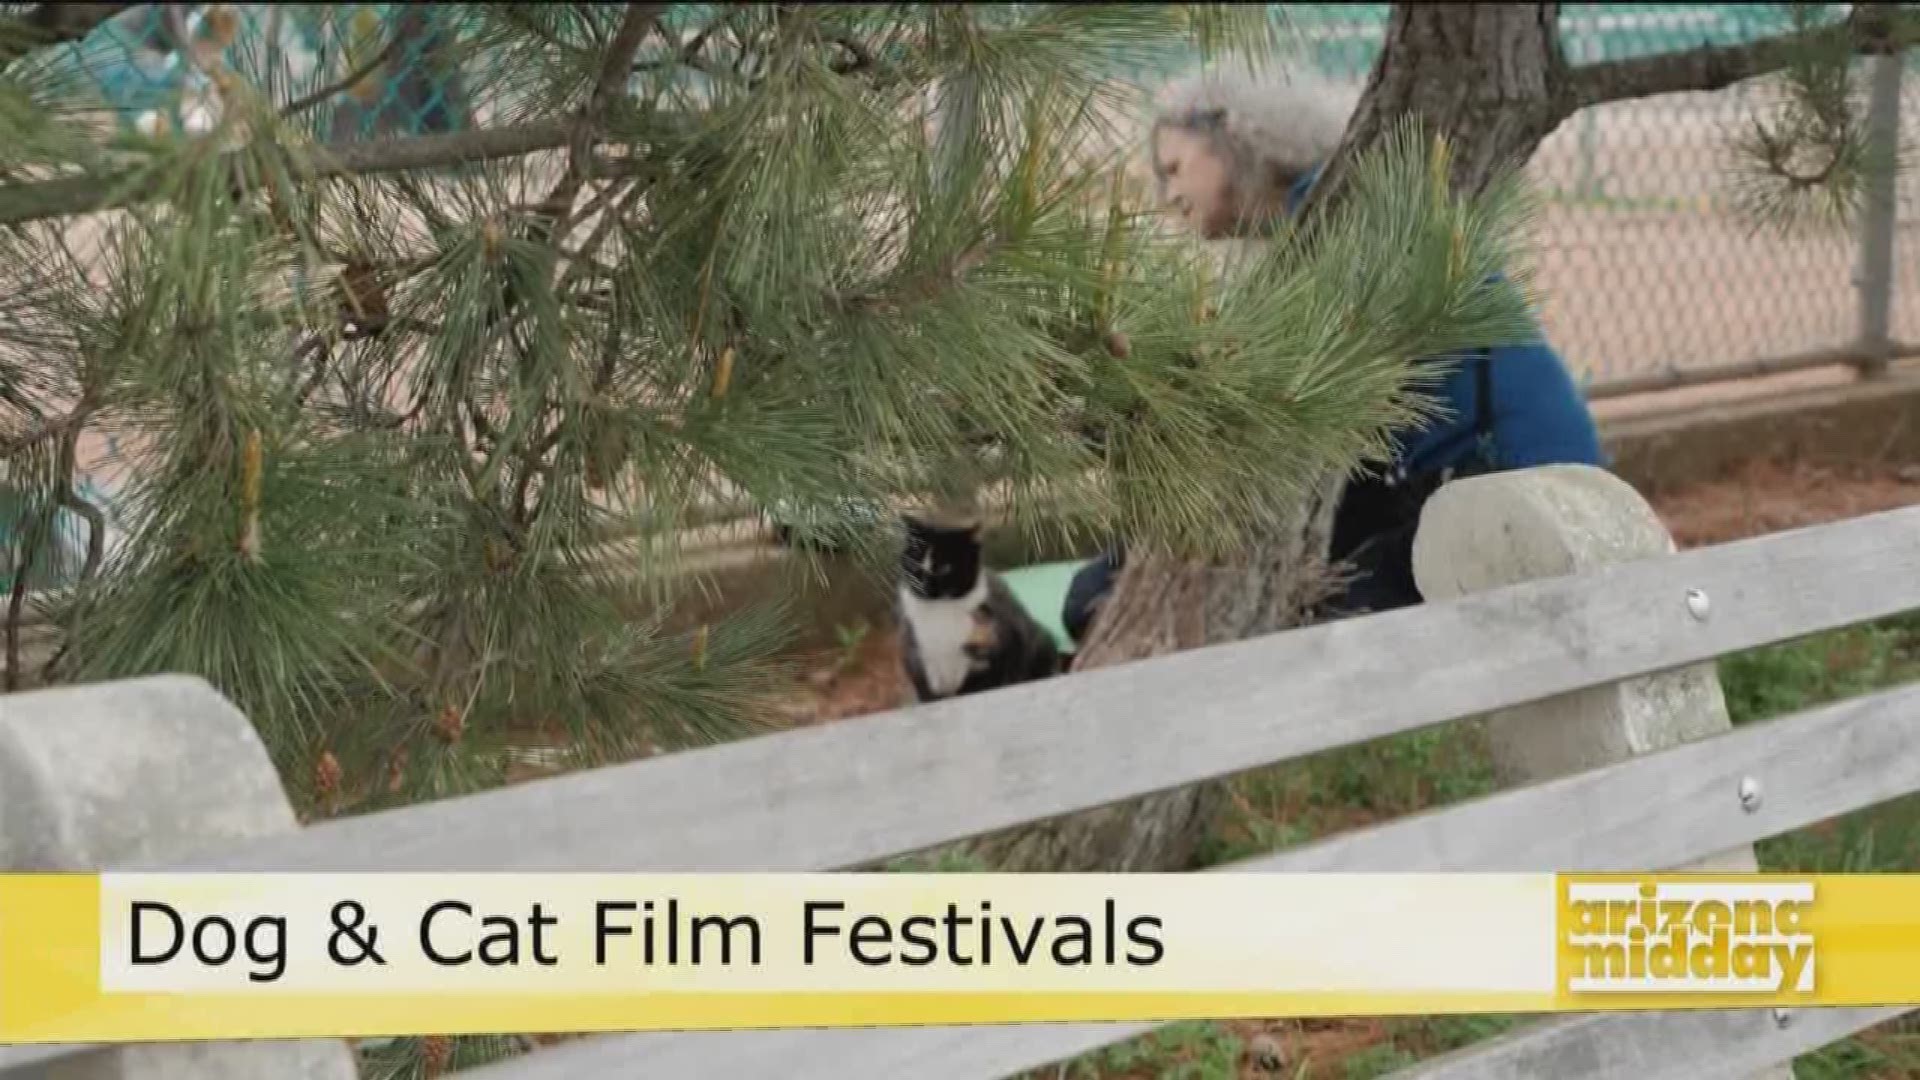 Emcee of the NY Cat Film Festival Kate Benjamin gives us a look at a movie playing this weekend and we meet a few furry friends up for adoption